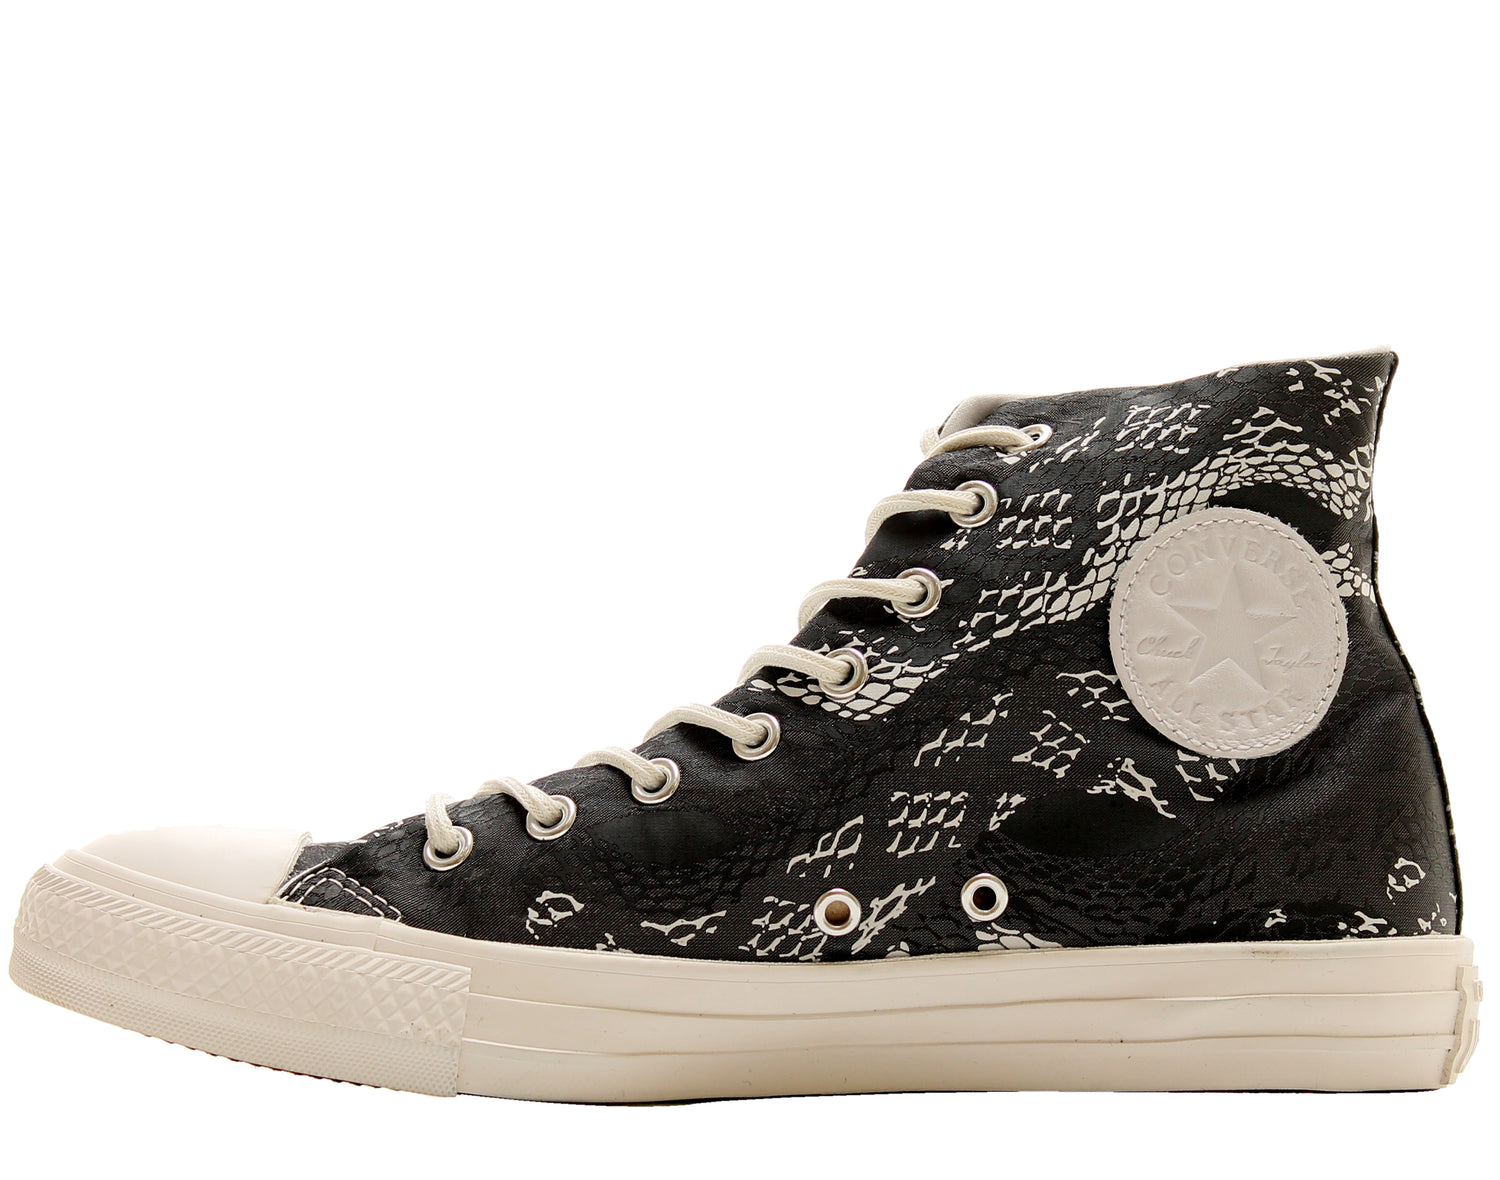 Converse Chuck Taylor All Star Reptile Print High top Women's Sneakers